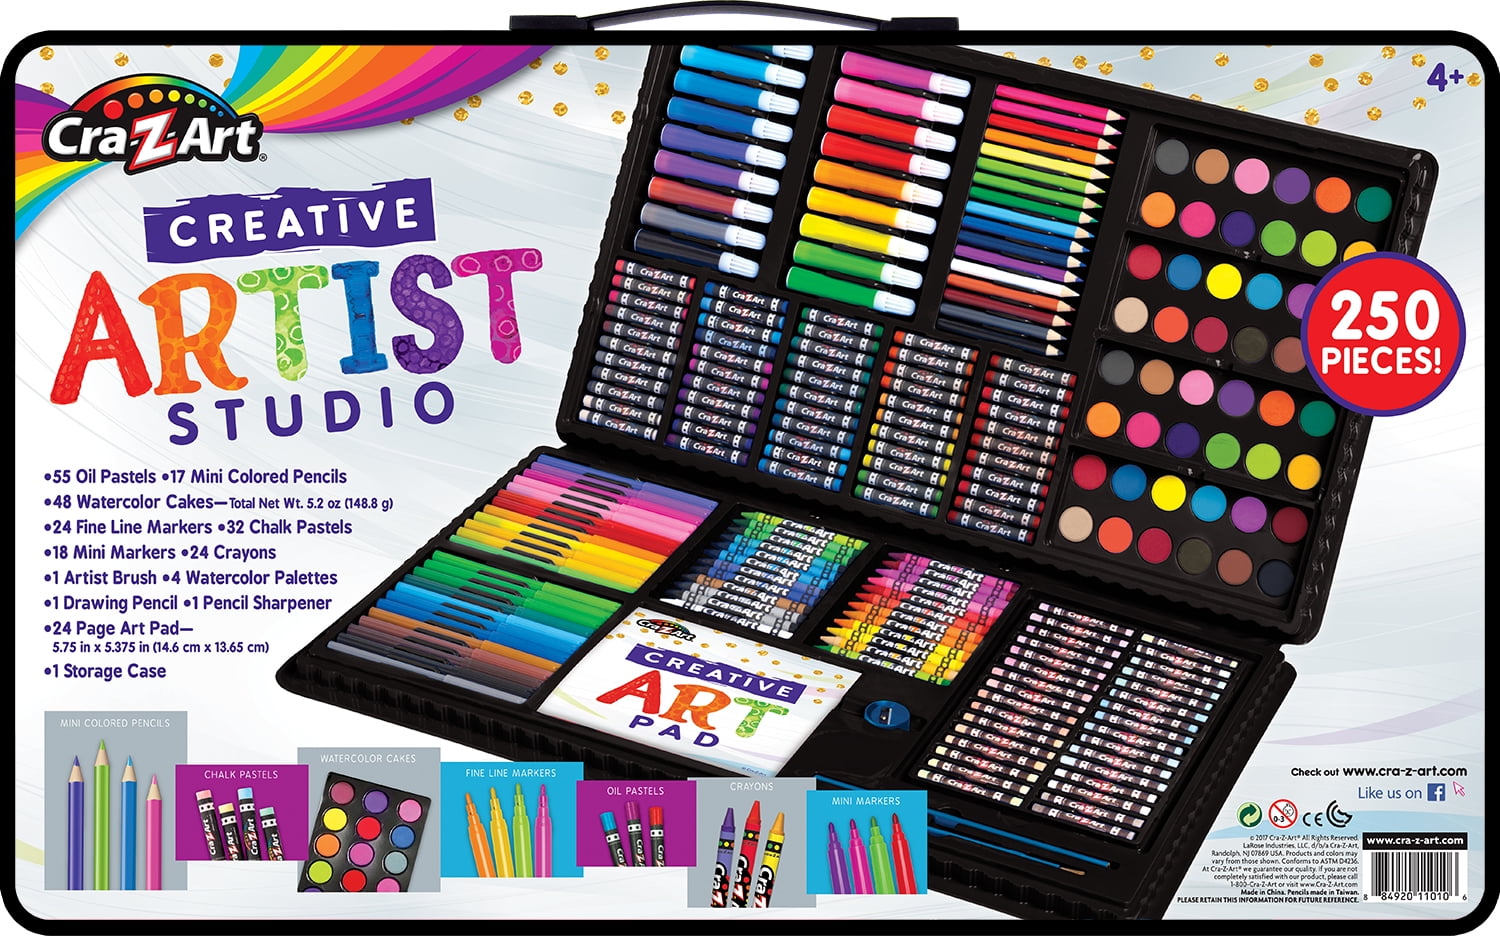 Nurture your young artist or treat yourself to the Cra-Z-Art Creative Artis...